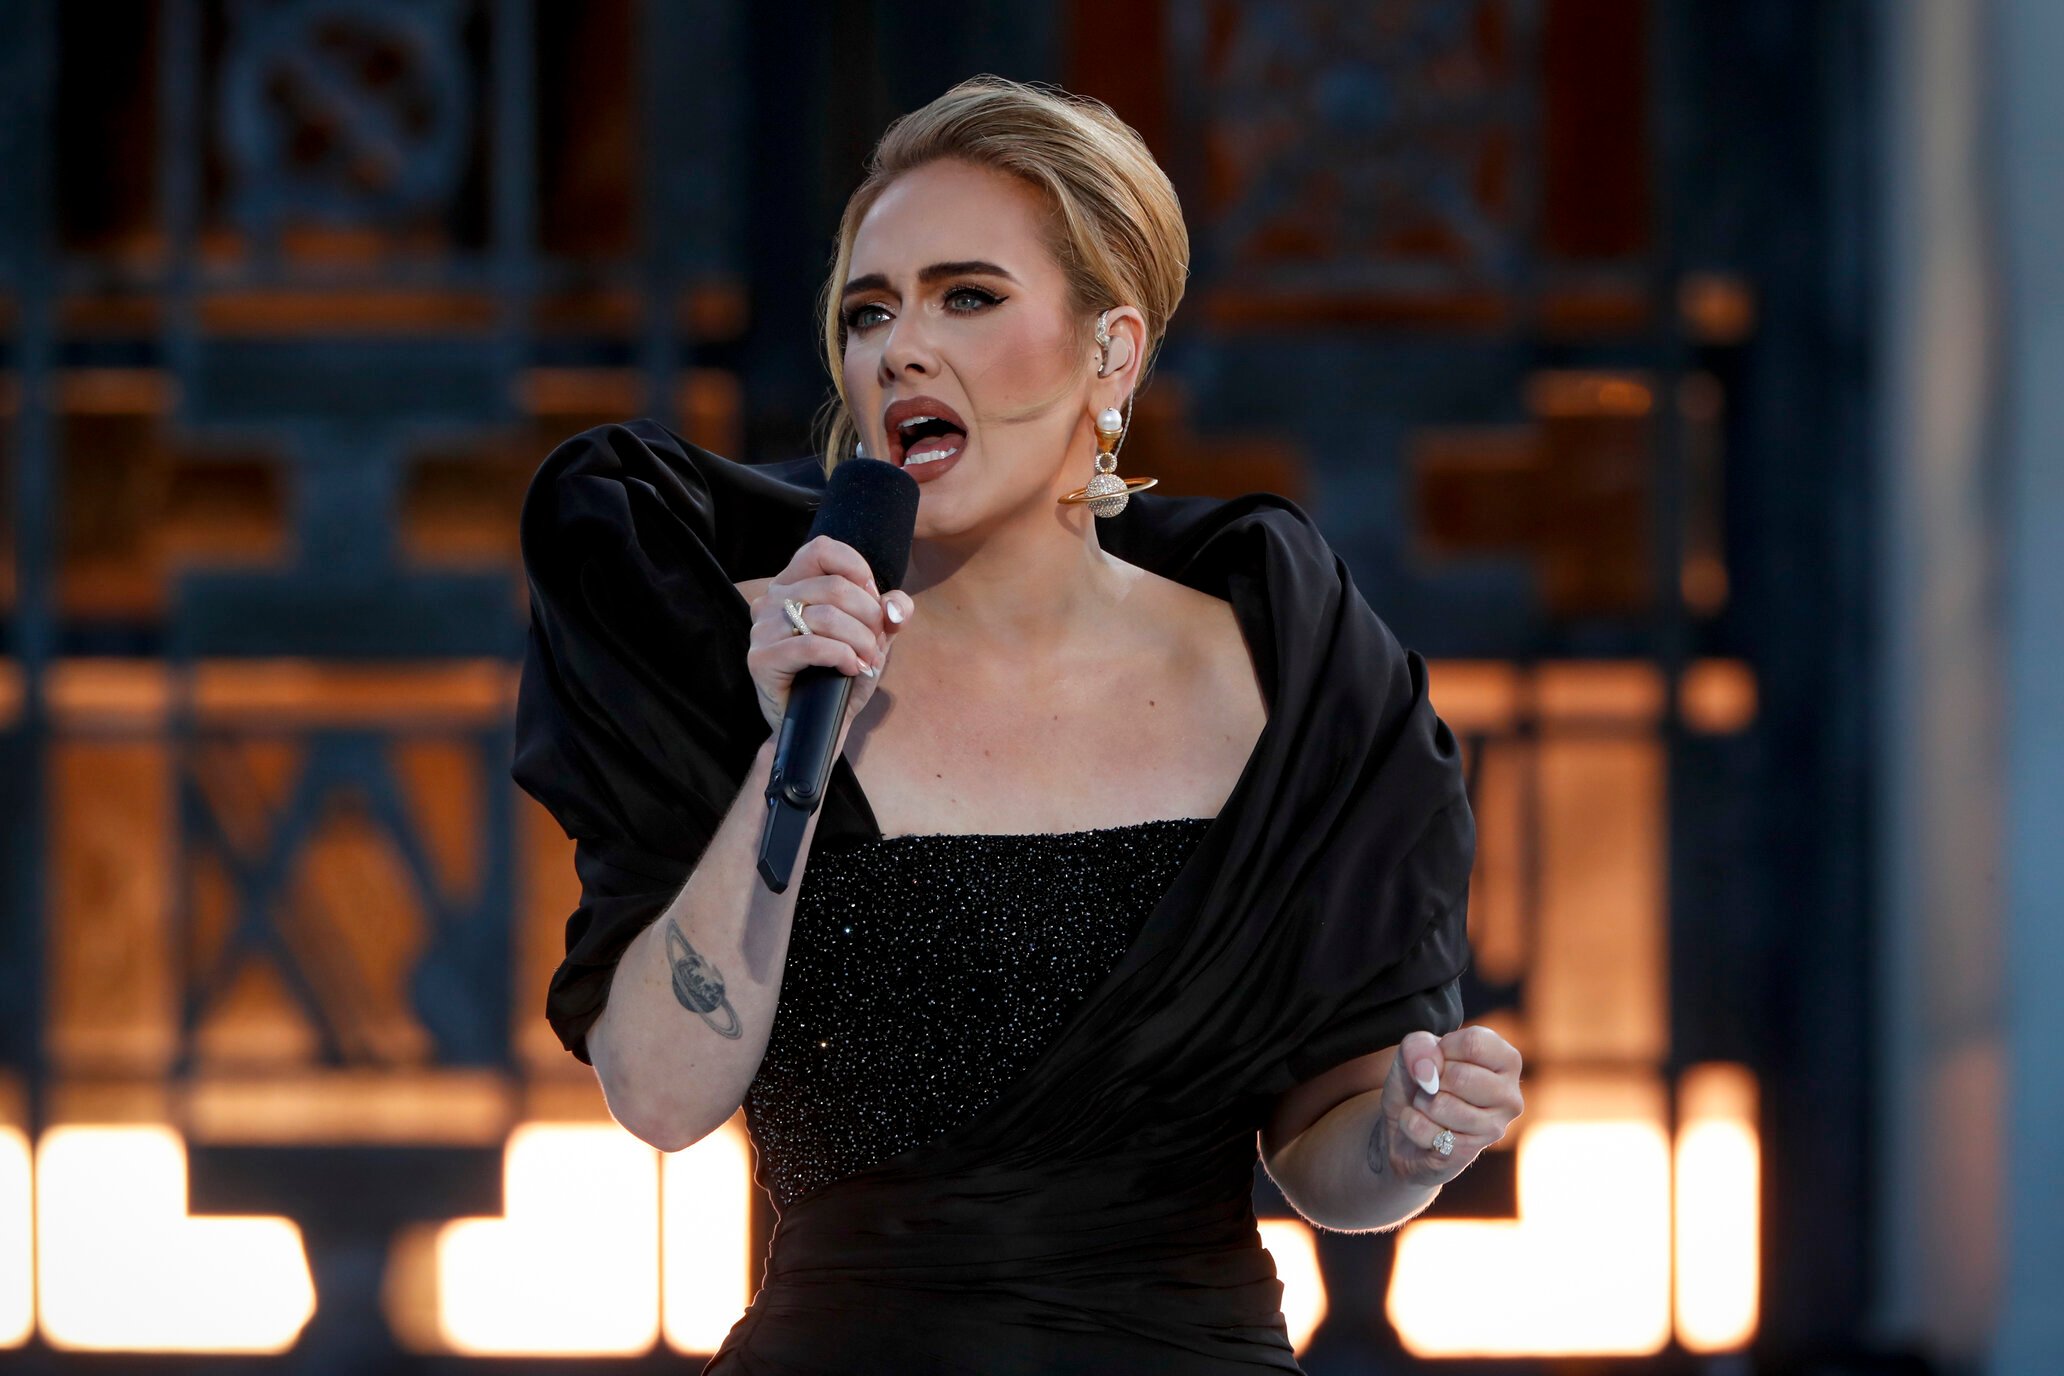 Adele singing into a microphone in a black dress.